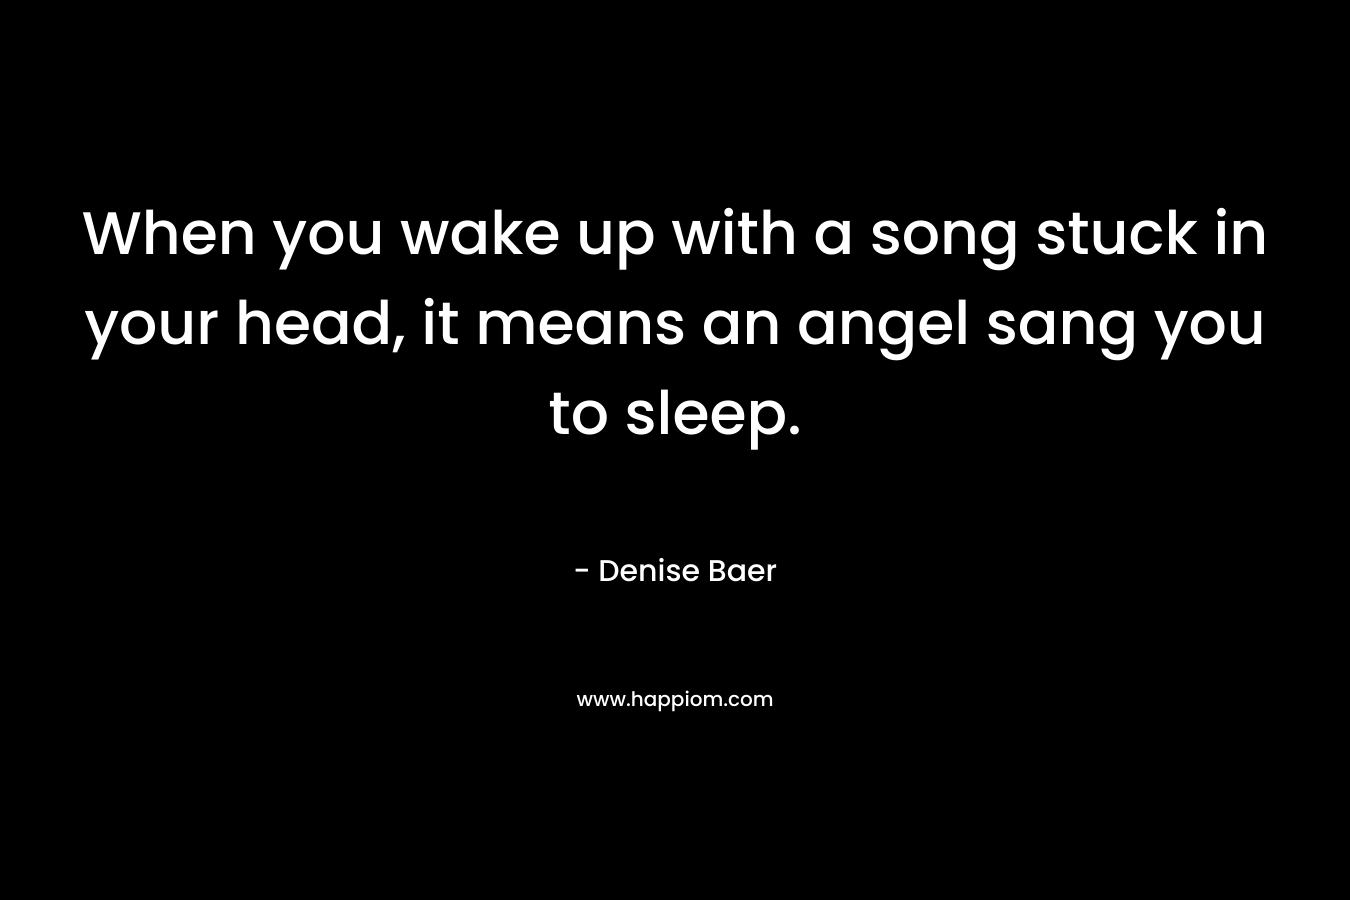 When you wake up with a song stuck in your head, it means an angel sang you to sleep.